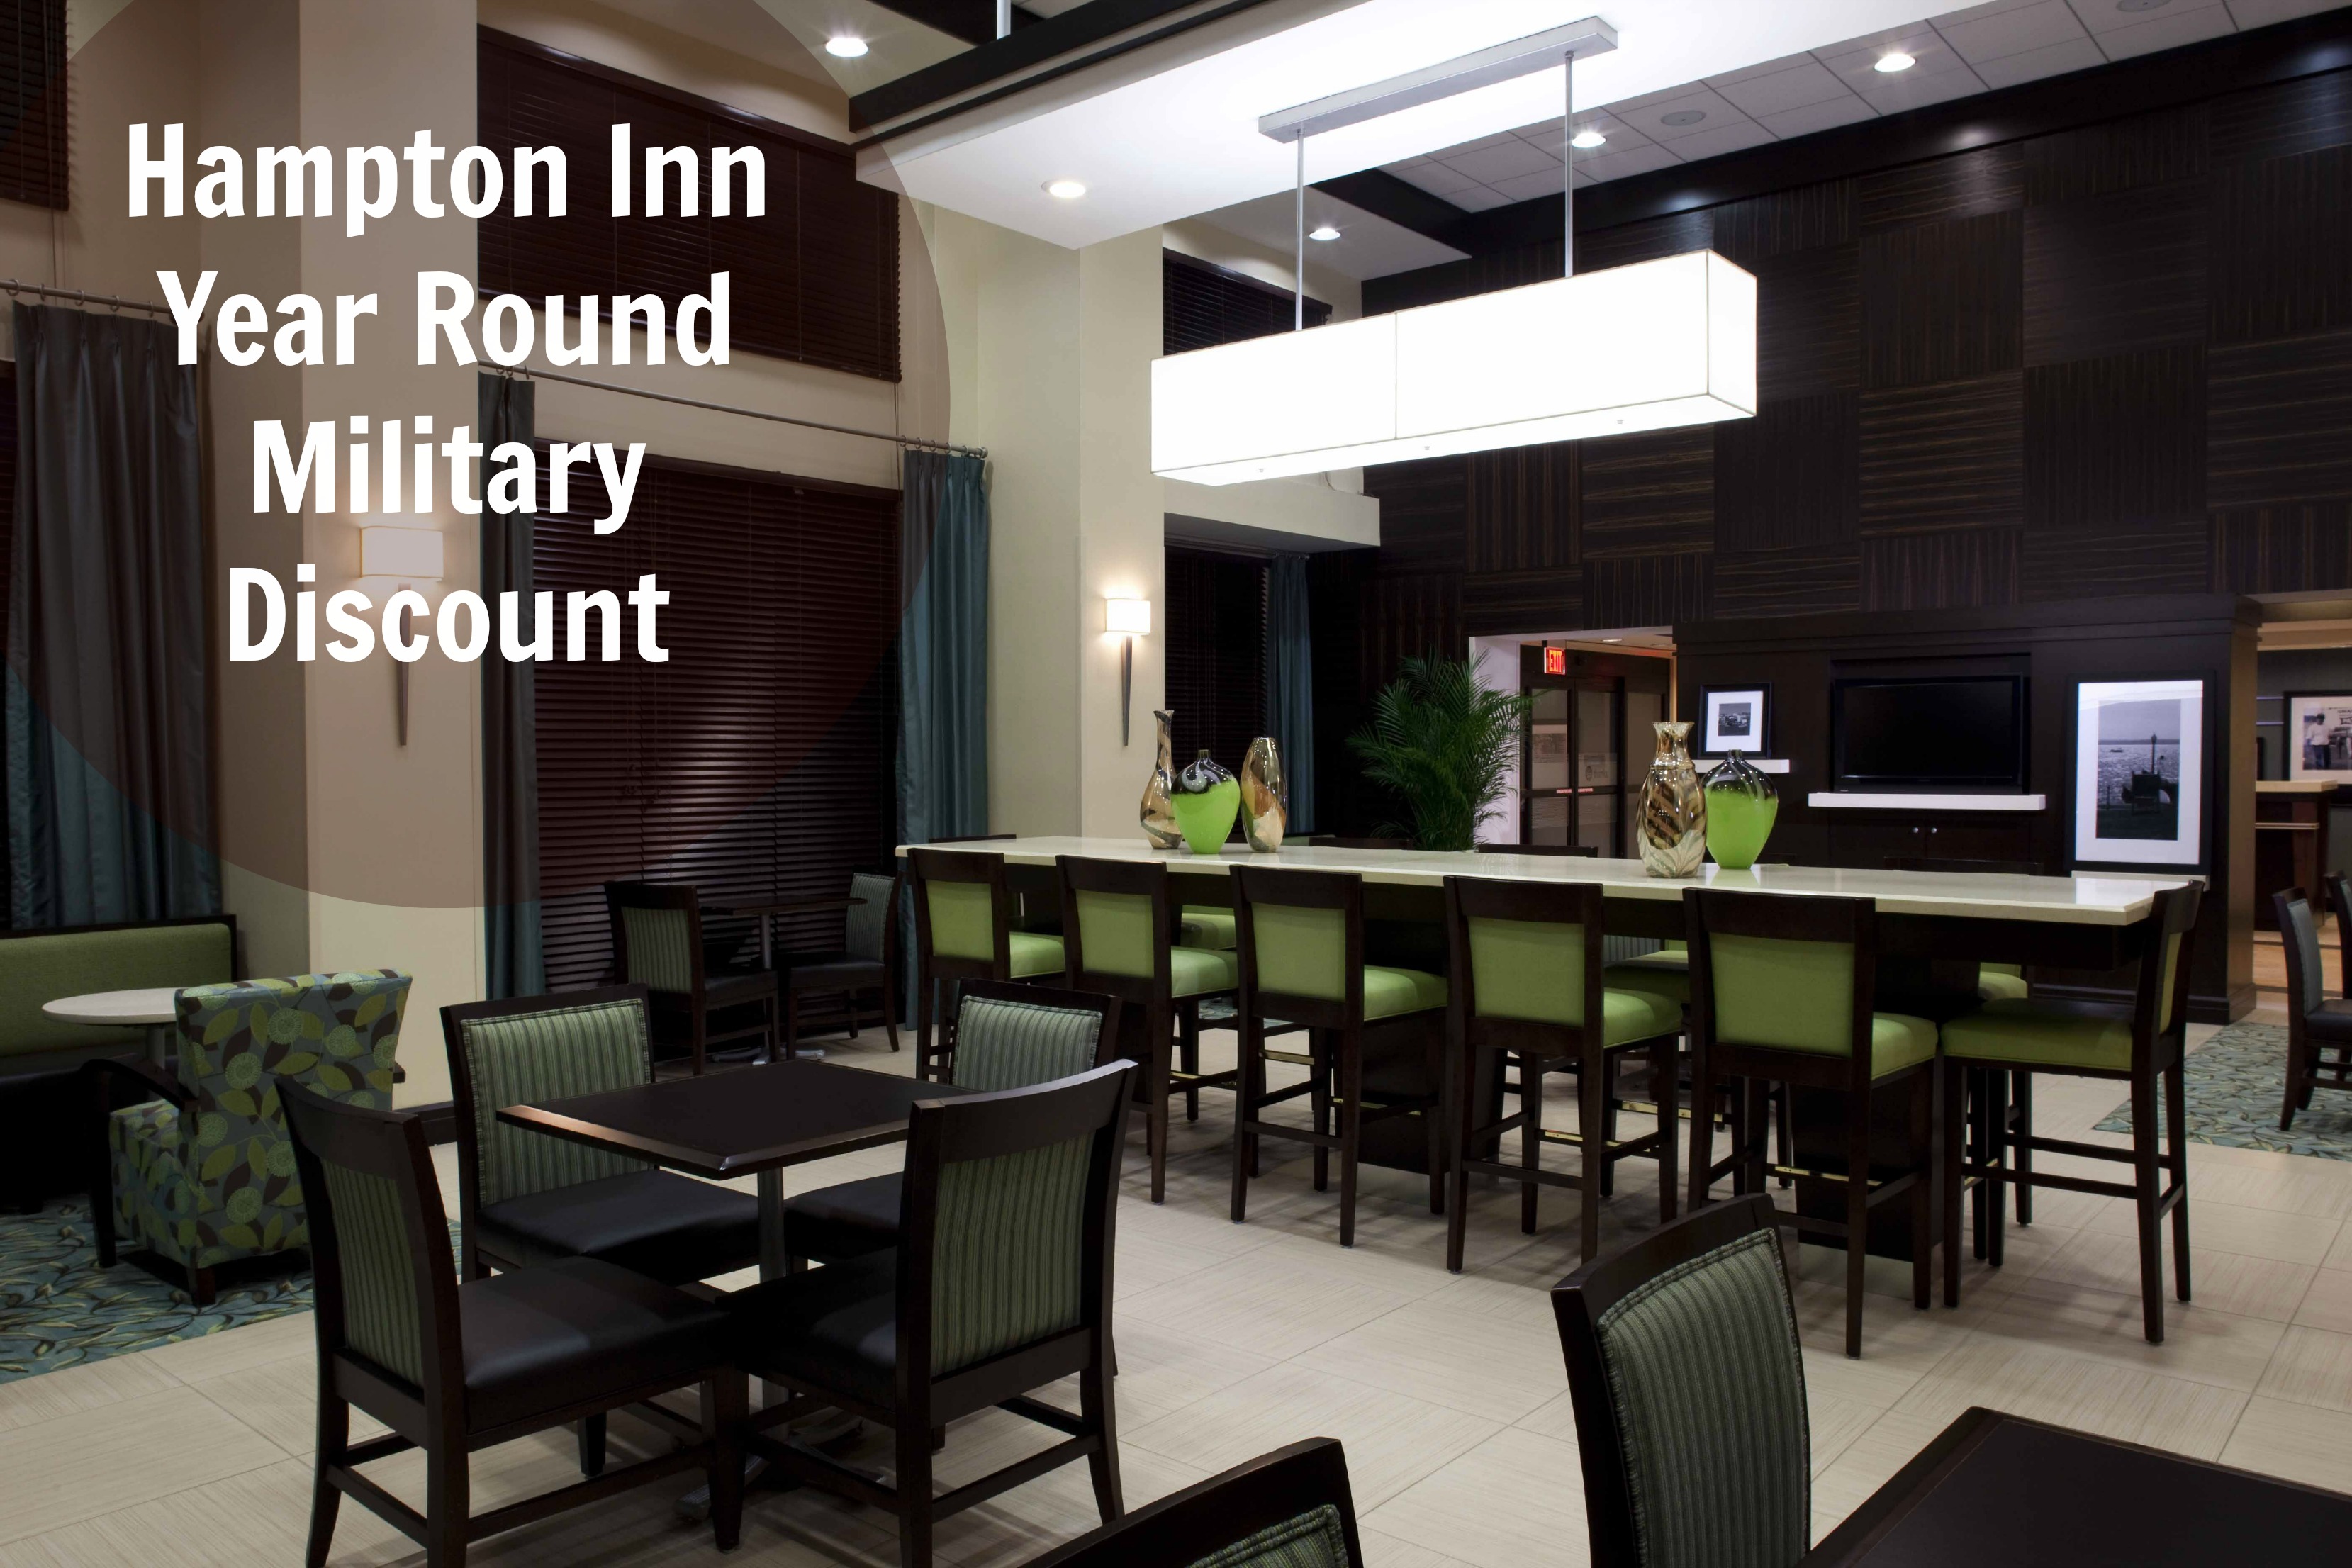 Select Hampton Inn Hotels Offering Year Round Military Discount